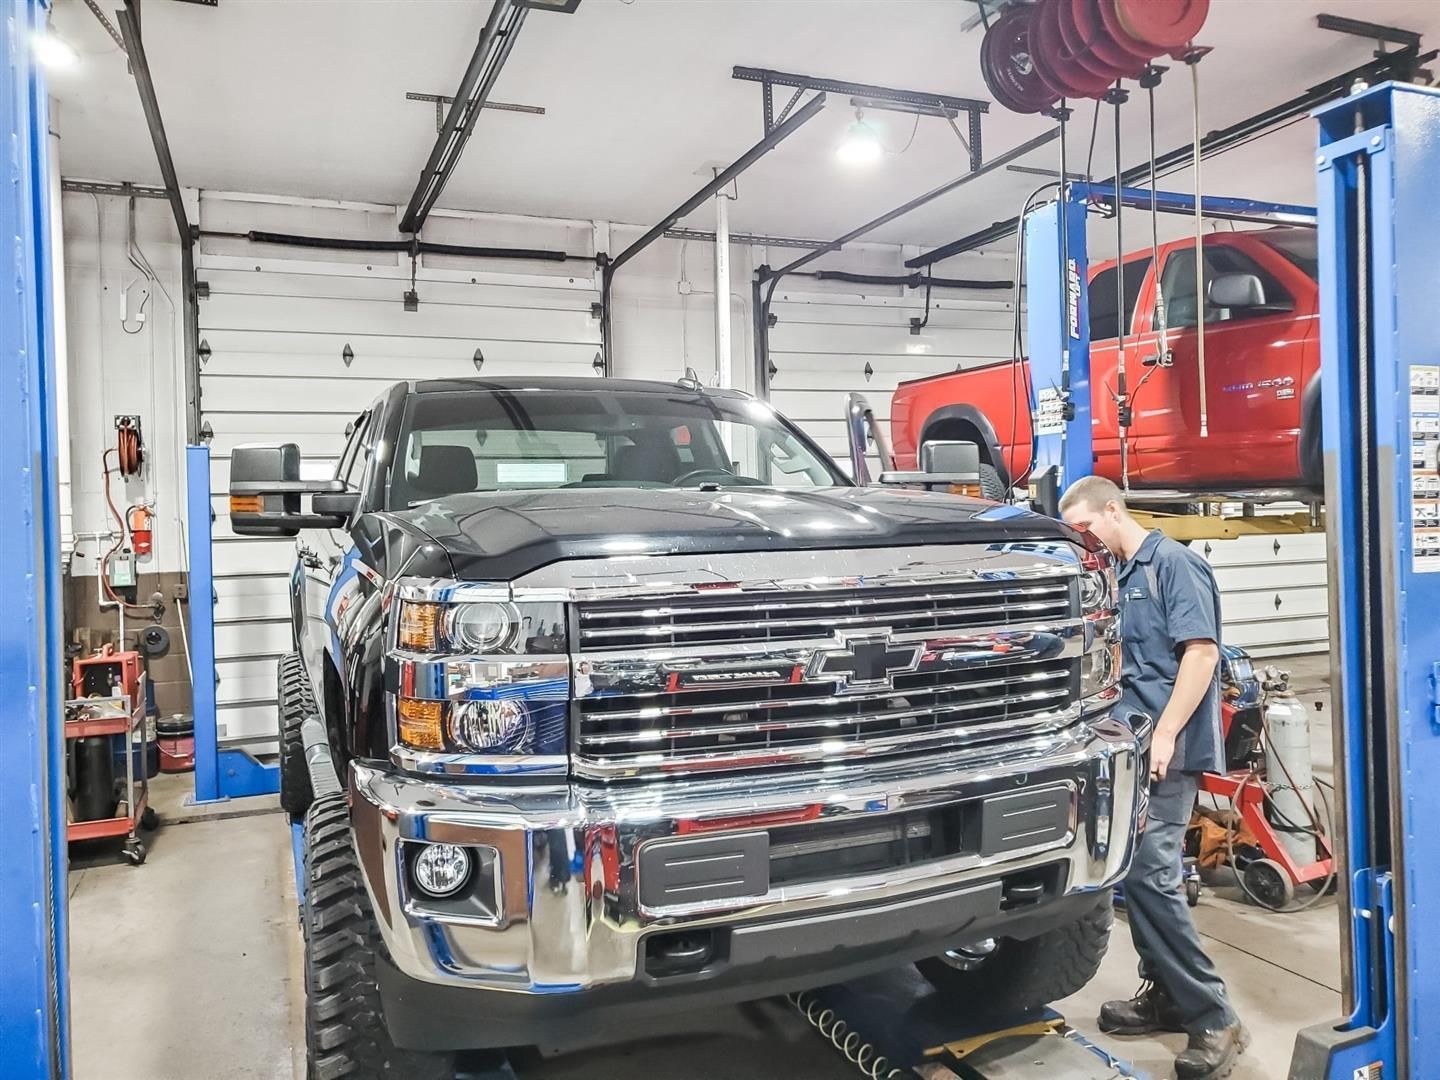 Chevy Auto Repair, Lift Kits and Tire Services | Beer's Automotive Services and Repair